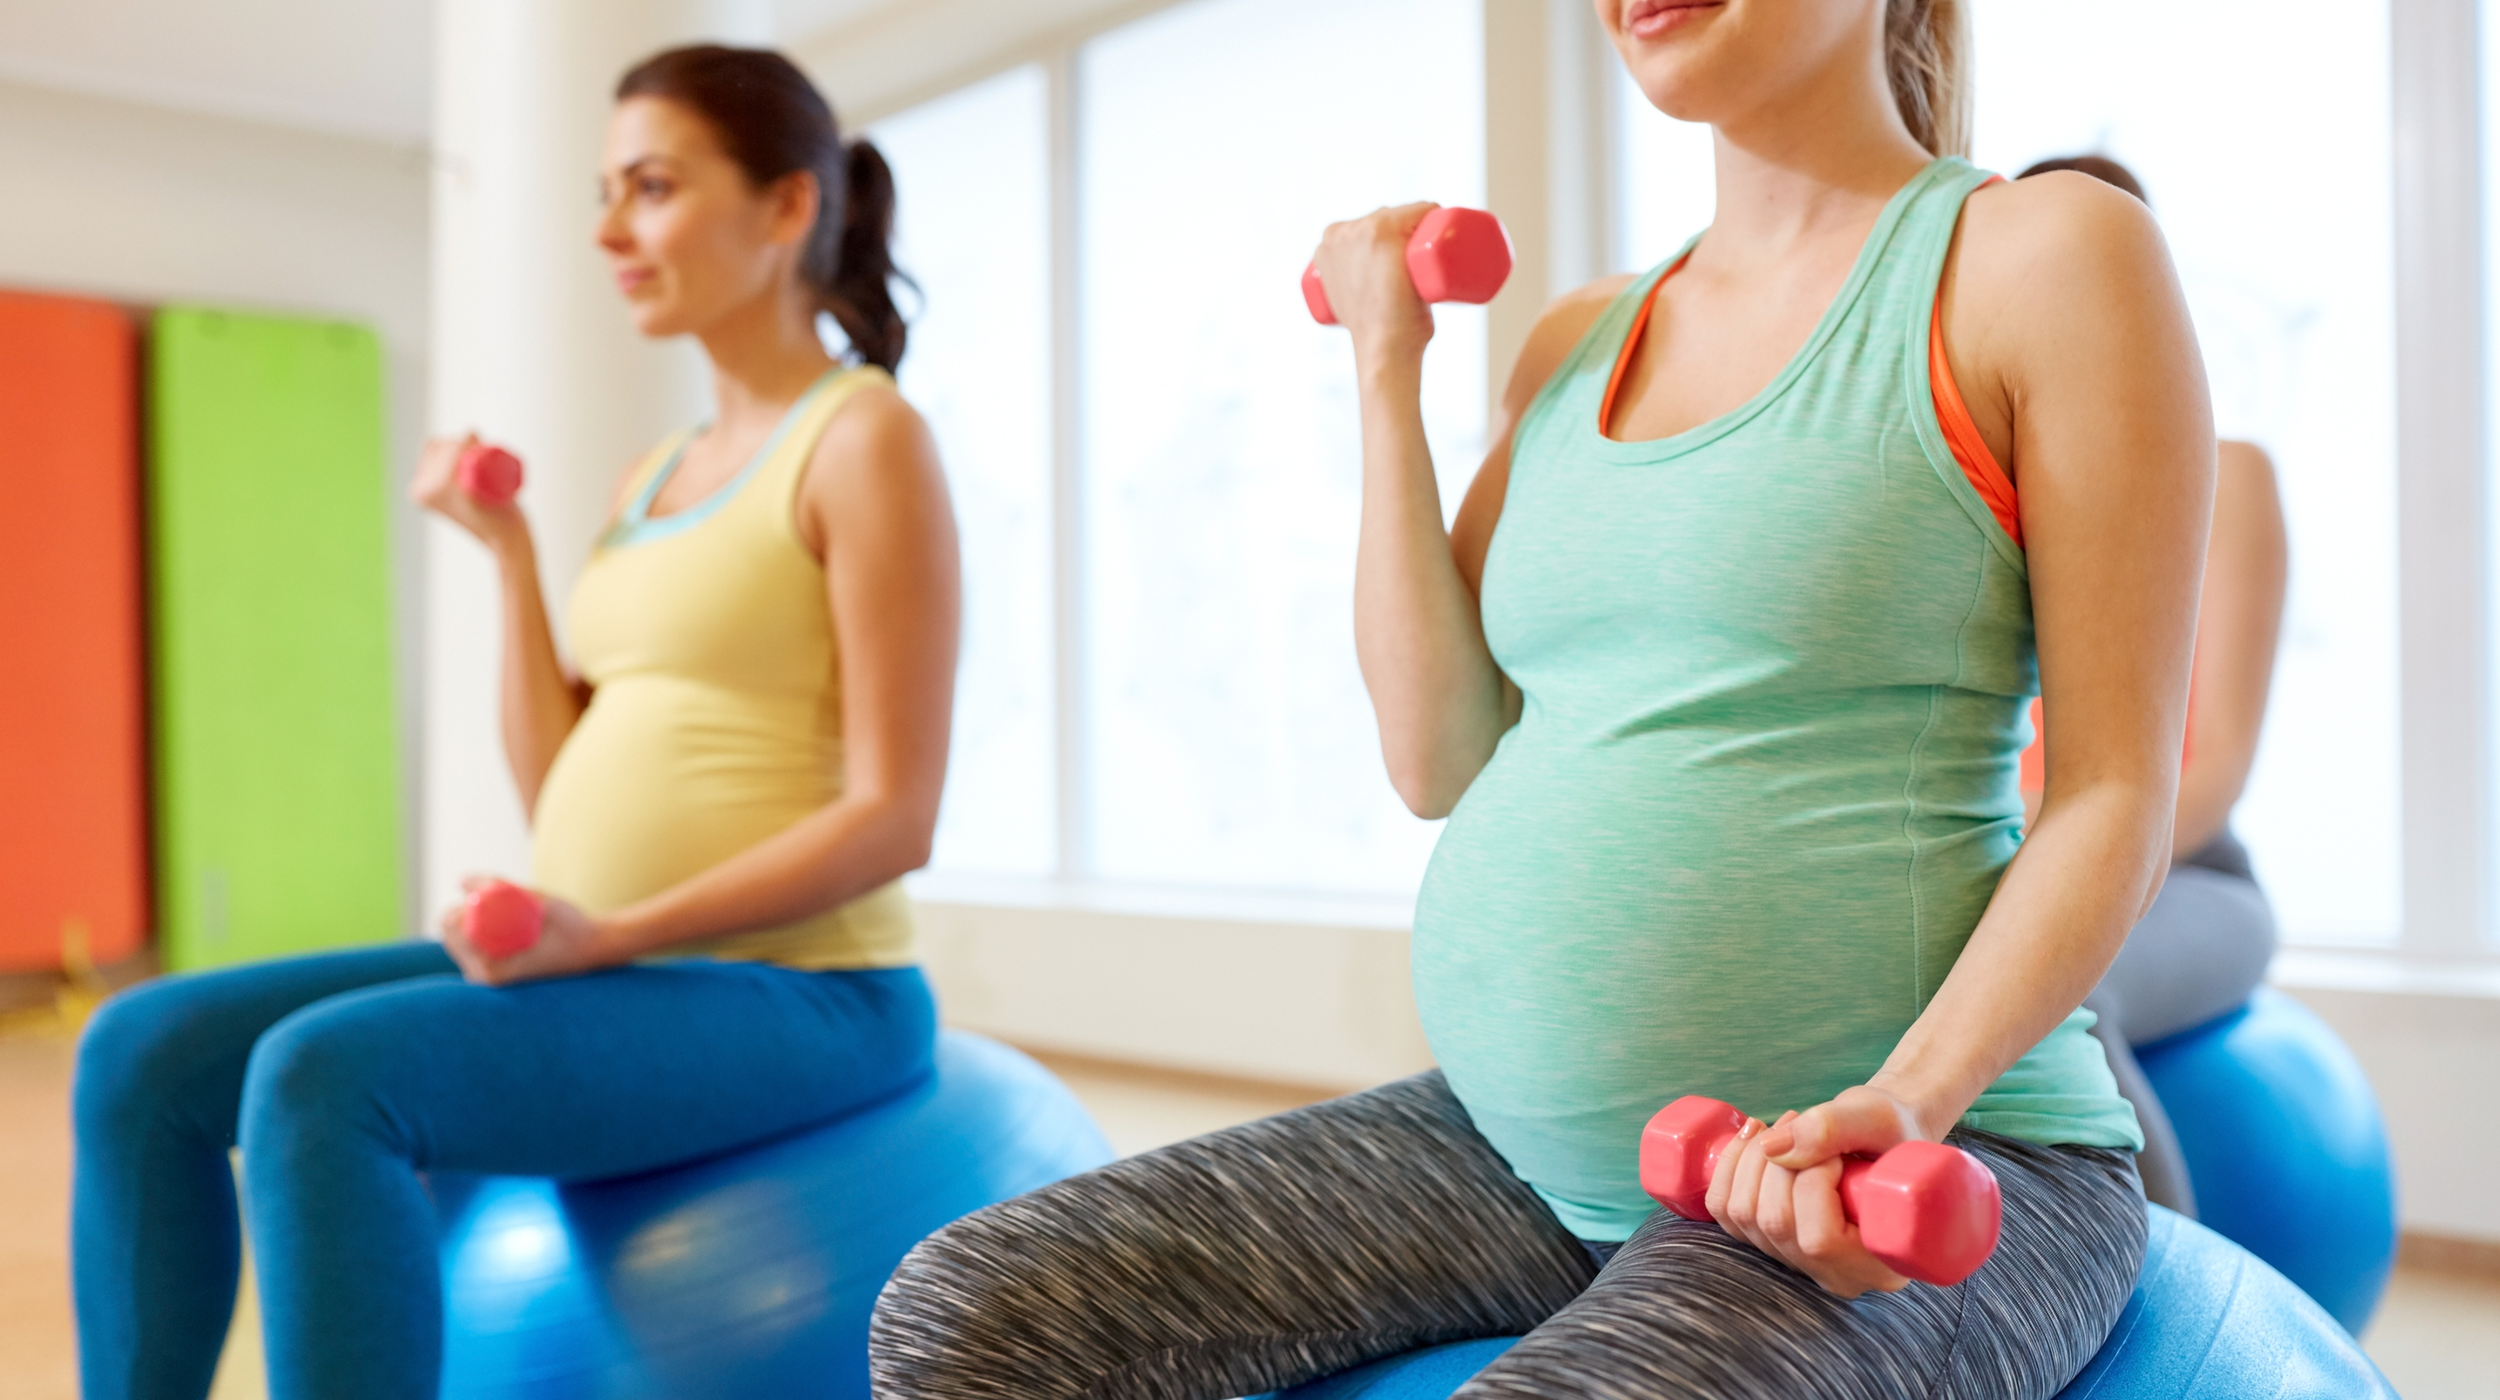 What are the Best Exercises for Pregnant Women?